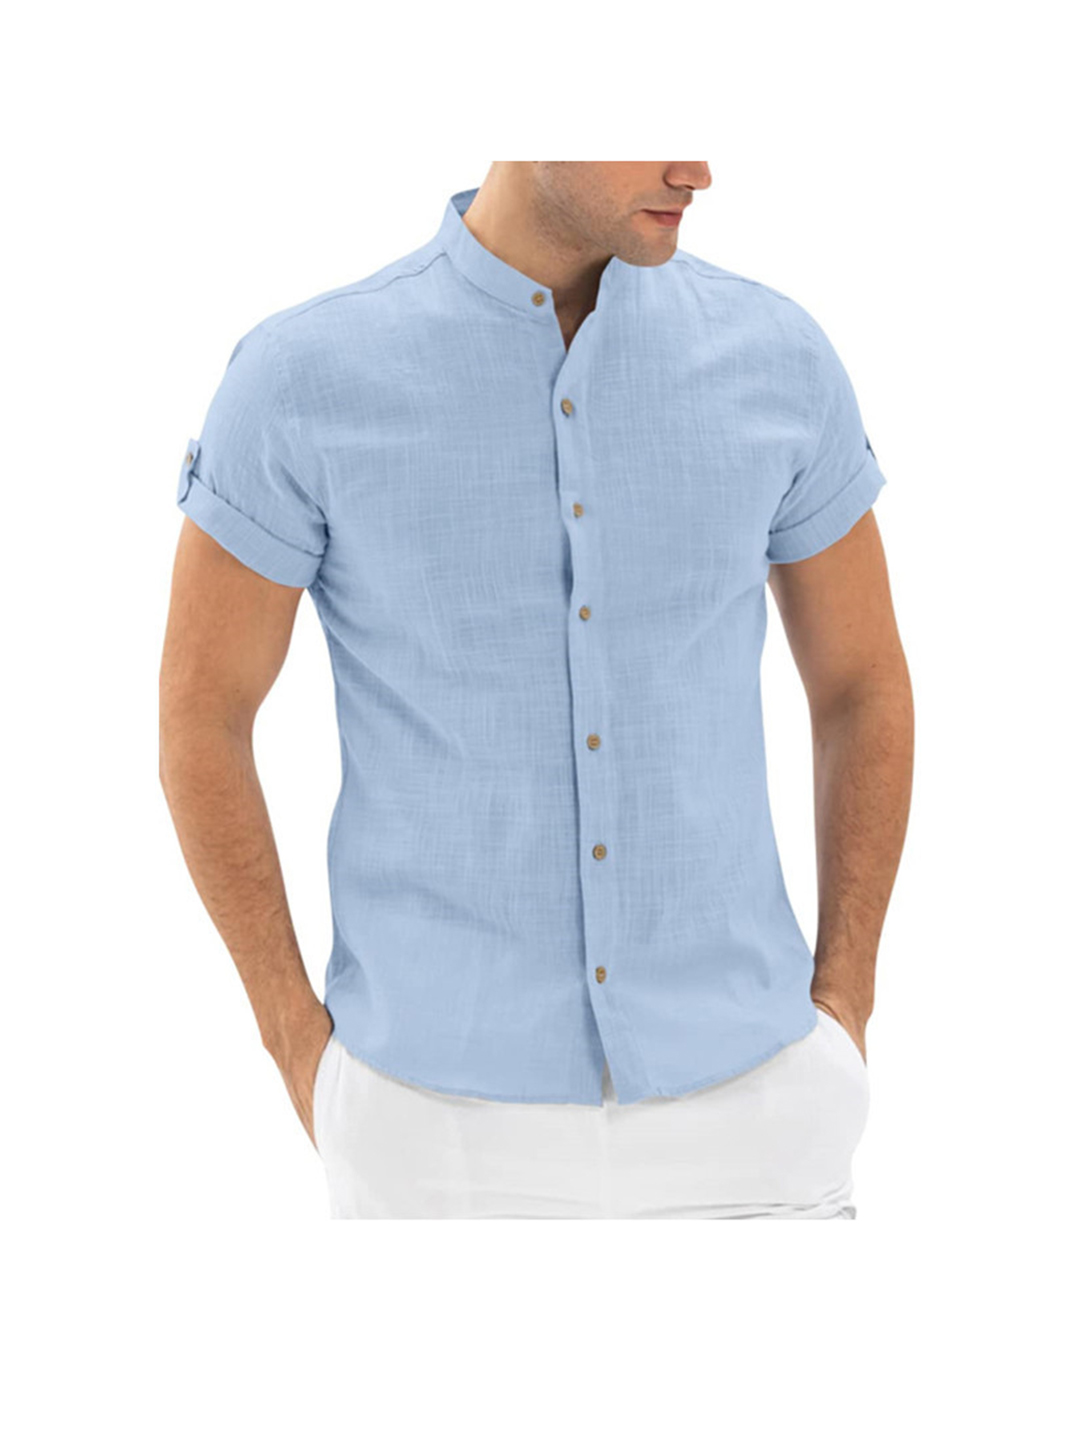 Men's Faust Solid Color Stand Collar Short Sleeve Shirt-poisonstreetwear.com